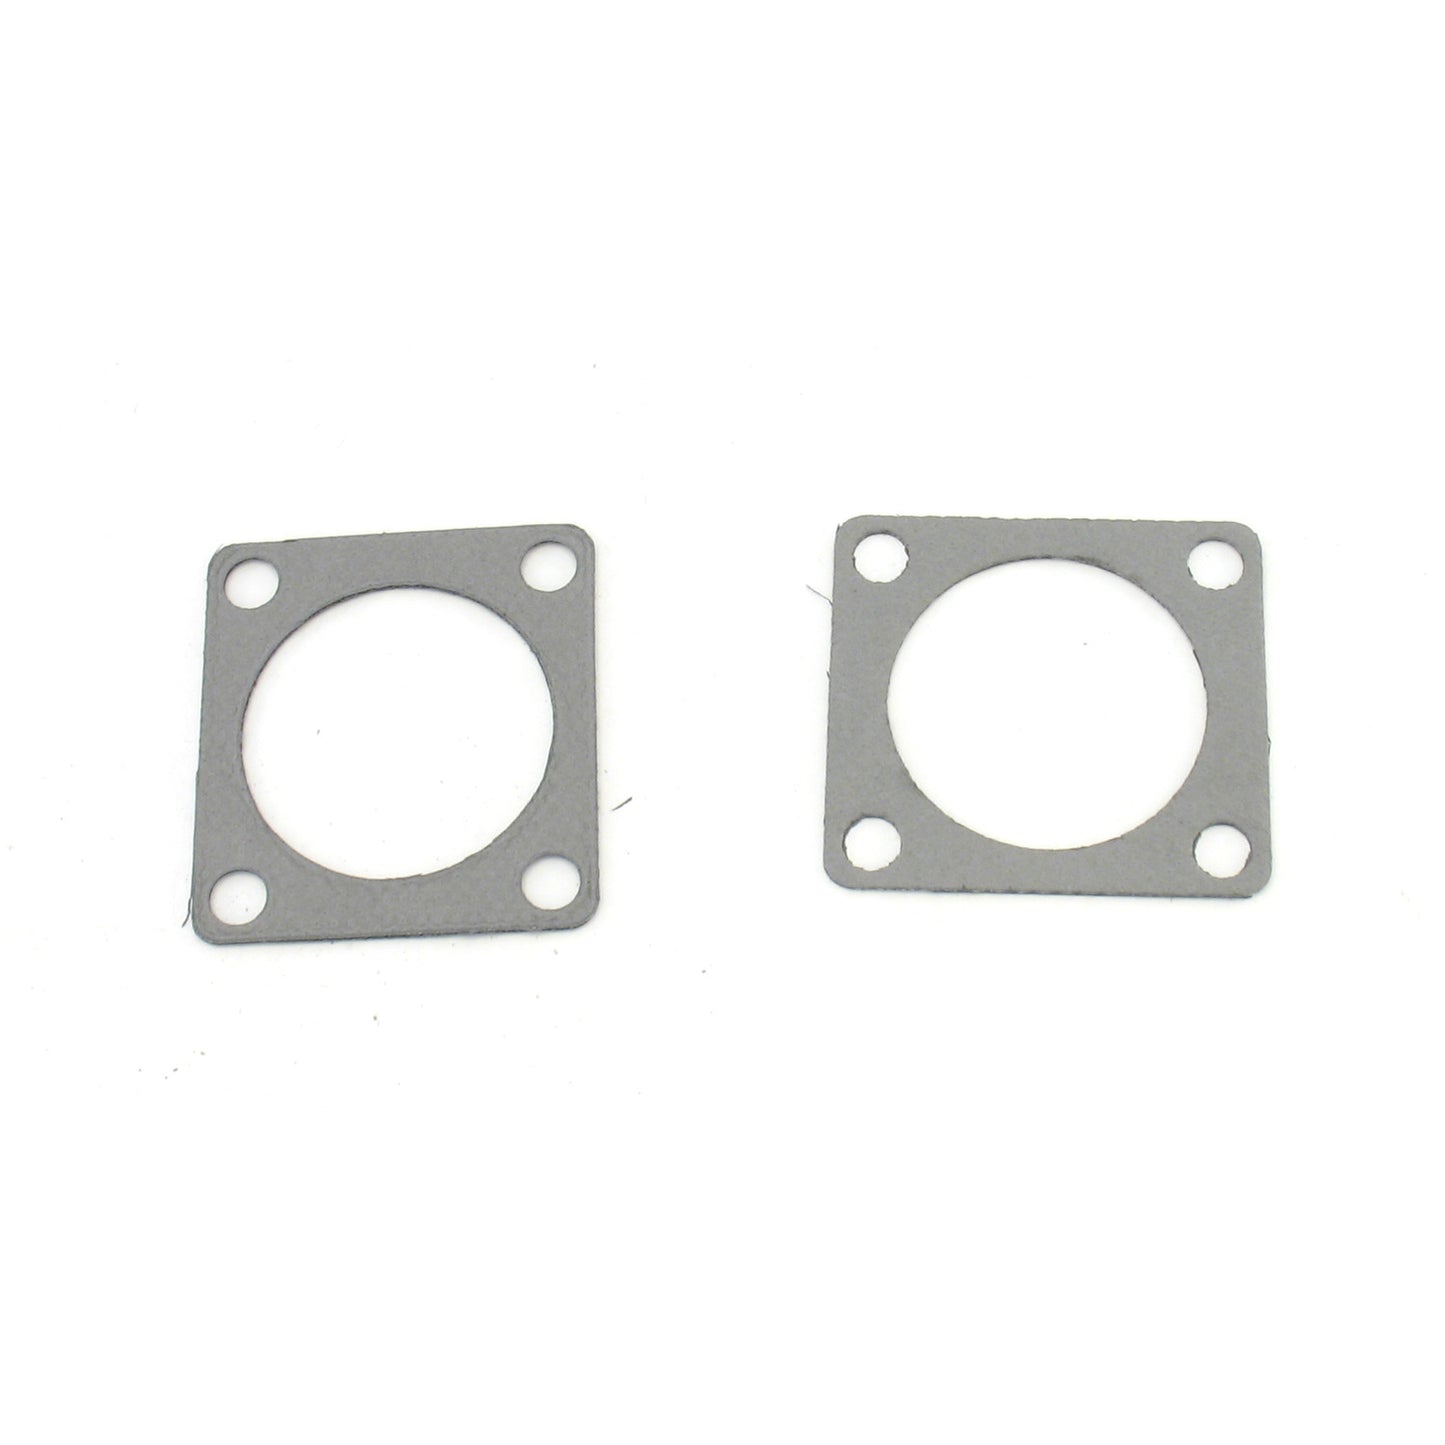 Patriot Exhaust H7546 Collector Gasket 2 1/2" Square 4 Bolt, pair